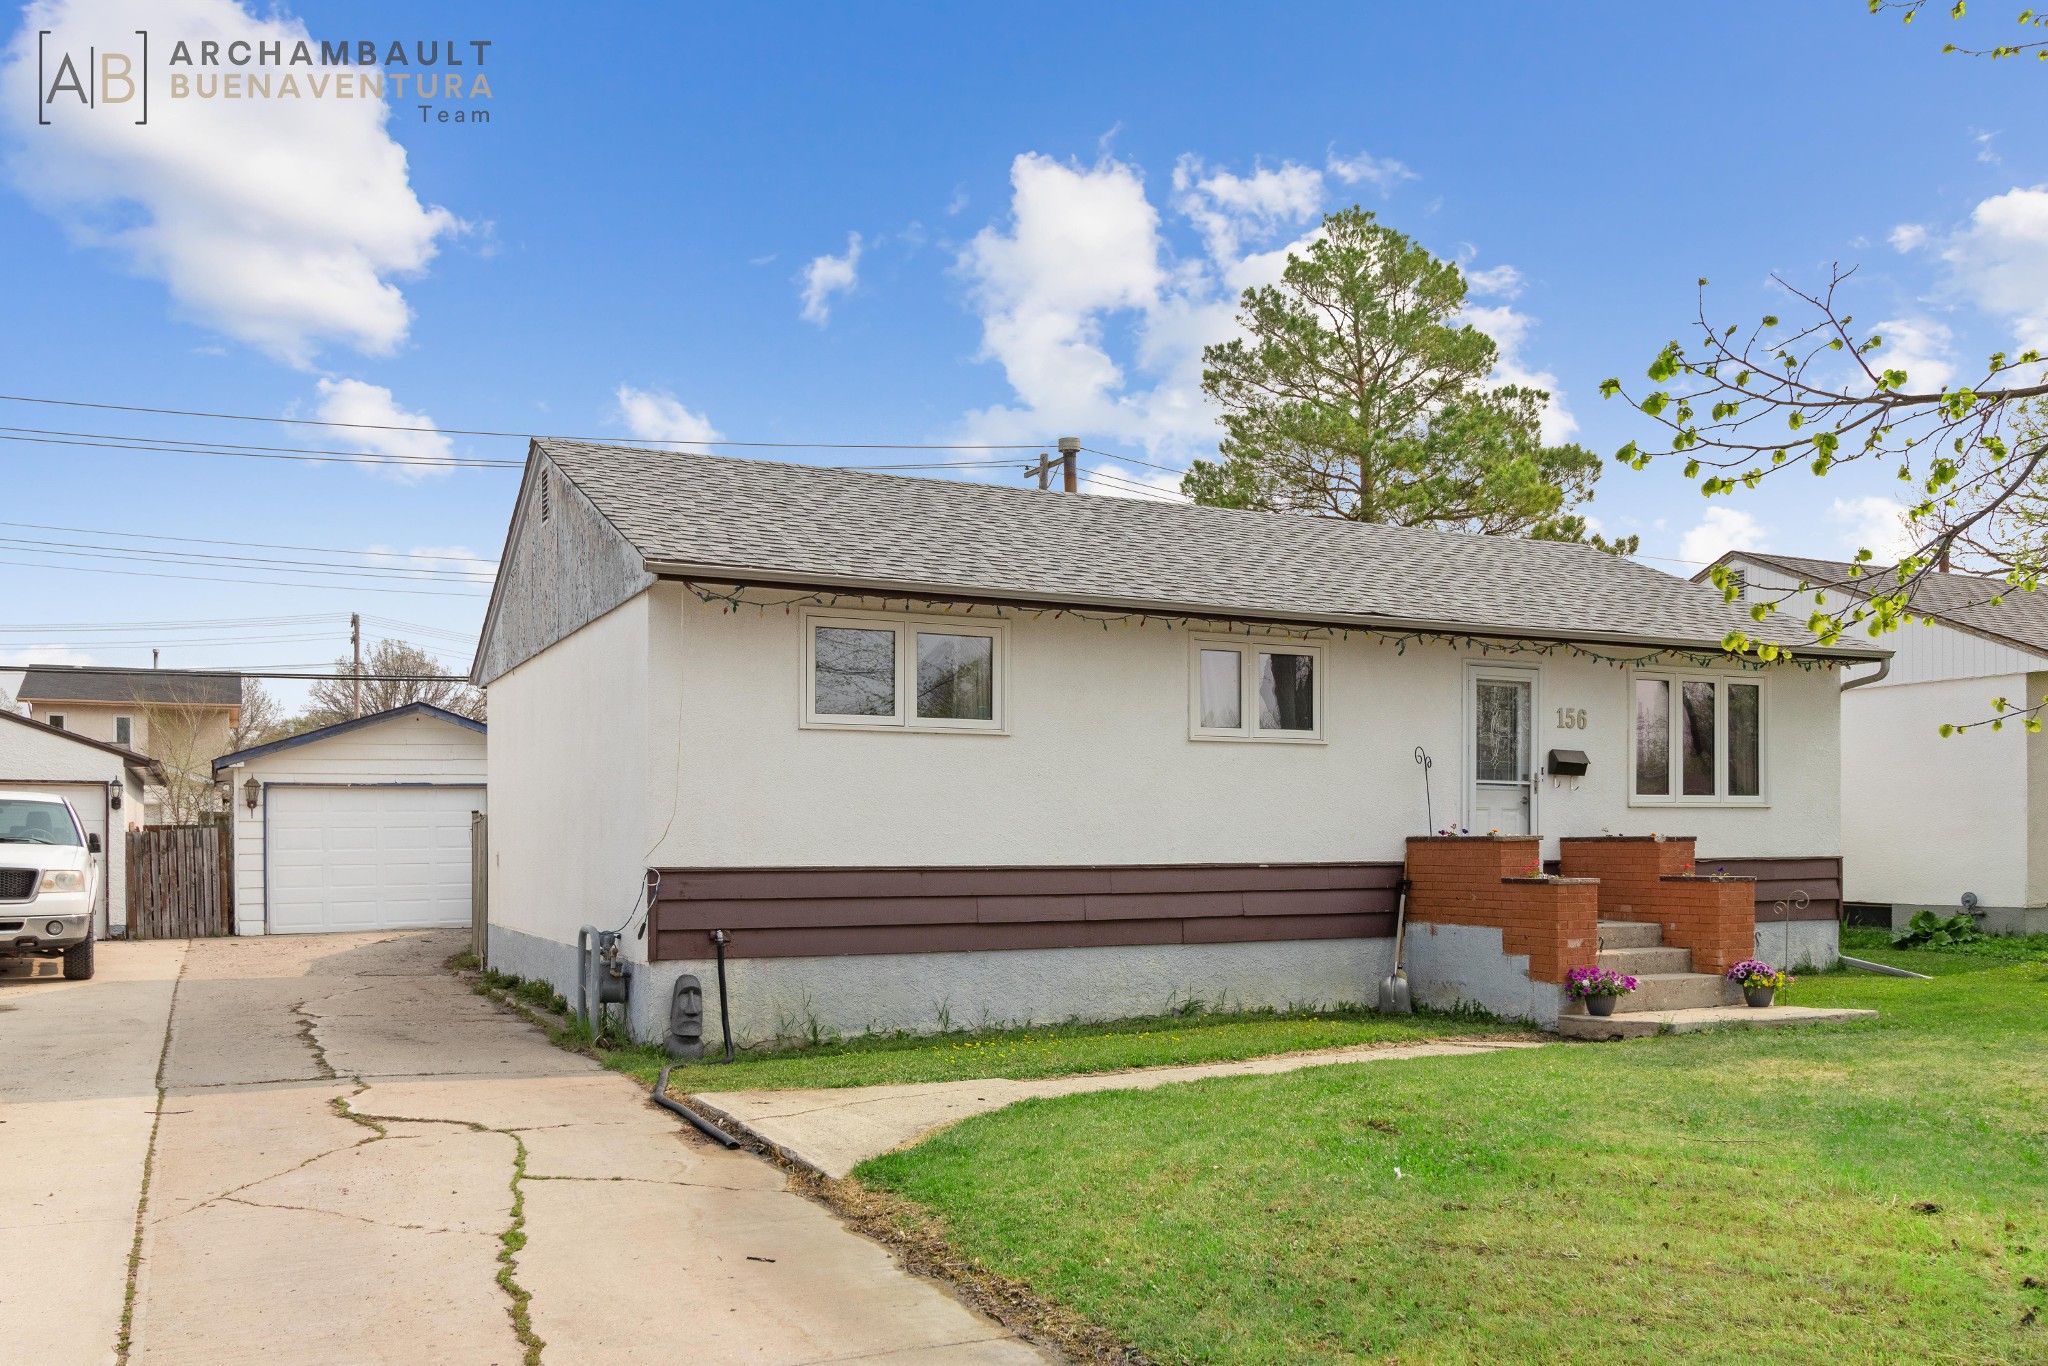 Open House. Open House on Saturday, May 20, 2023 12:00PM - 2:00PM
North Kildonan home with 3 bed &amp; 2 Bath!
3 Bed bung on a 55' wide lot. Original hardwood floors, windows (2016), Shingles (2019), AC (2019) Furnace (2023) and so much more! Backyard is 